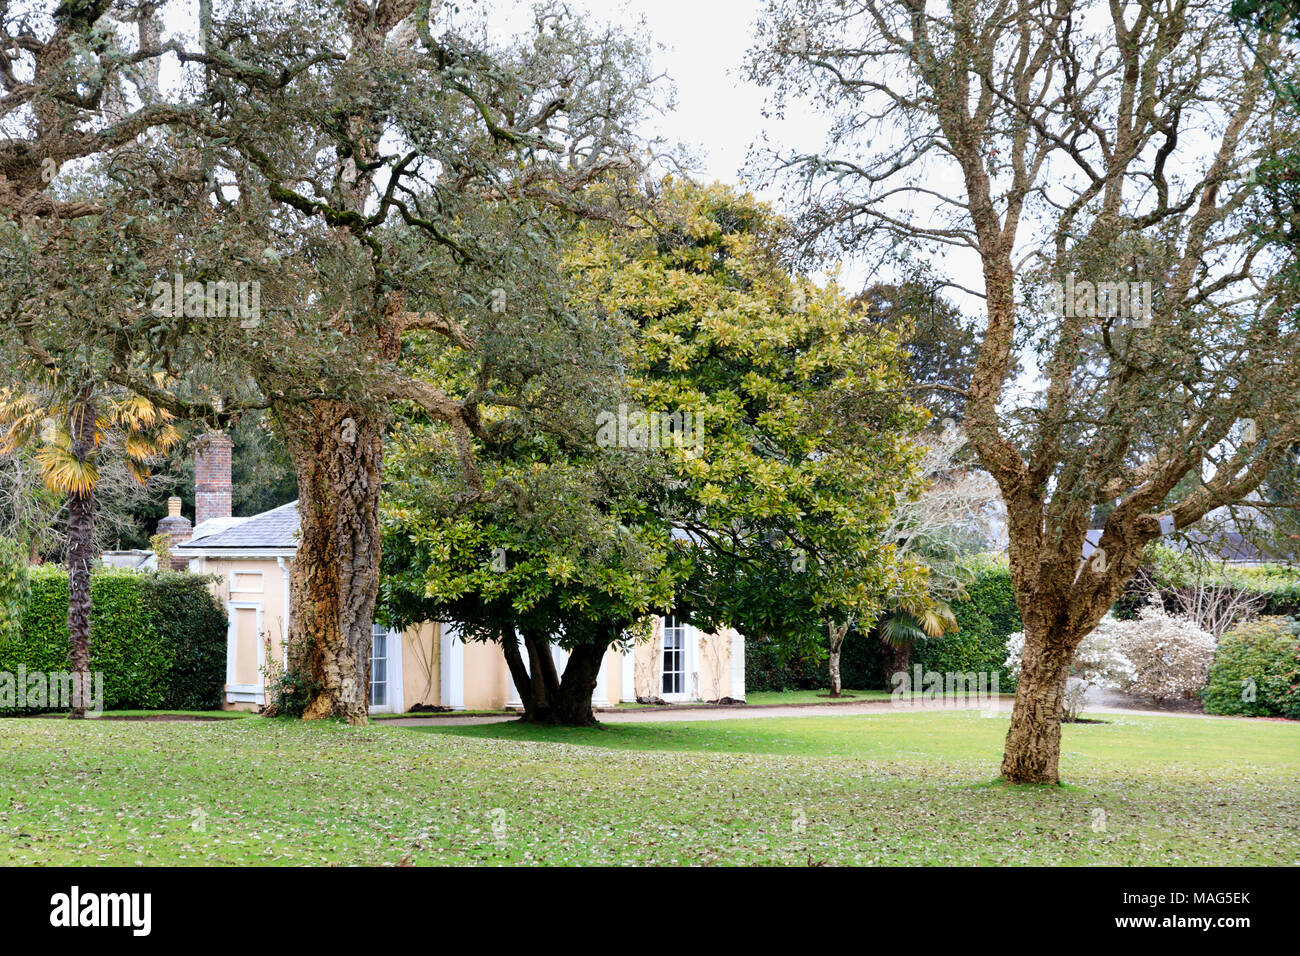 Old cork oak trees, Quercus suber, frame the view of the garden house in the English garden at Mount Edgcumbe, Cornwall, UK Stock Photo